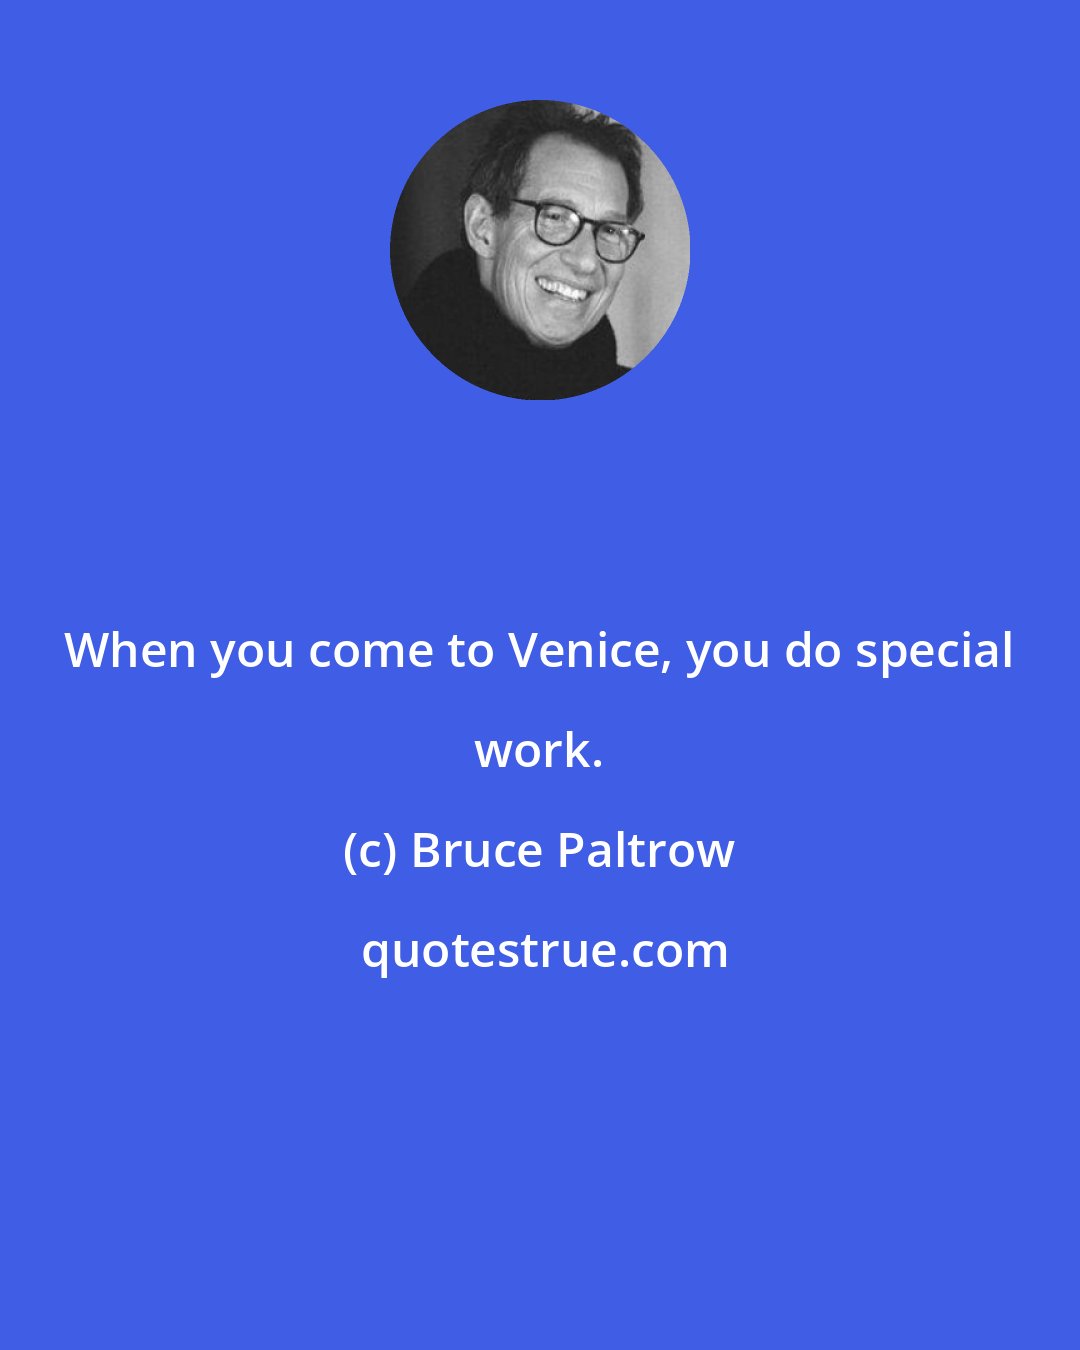 Bruce Paltrow: When you come to Venice, you do special work.